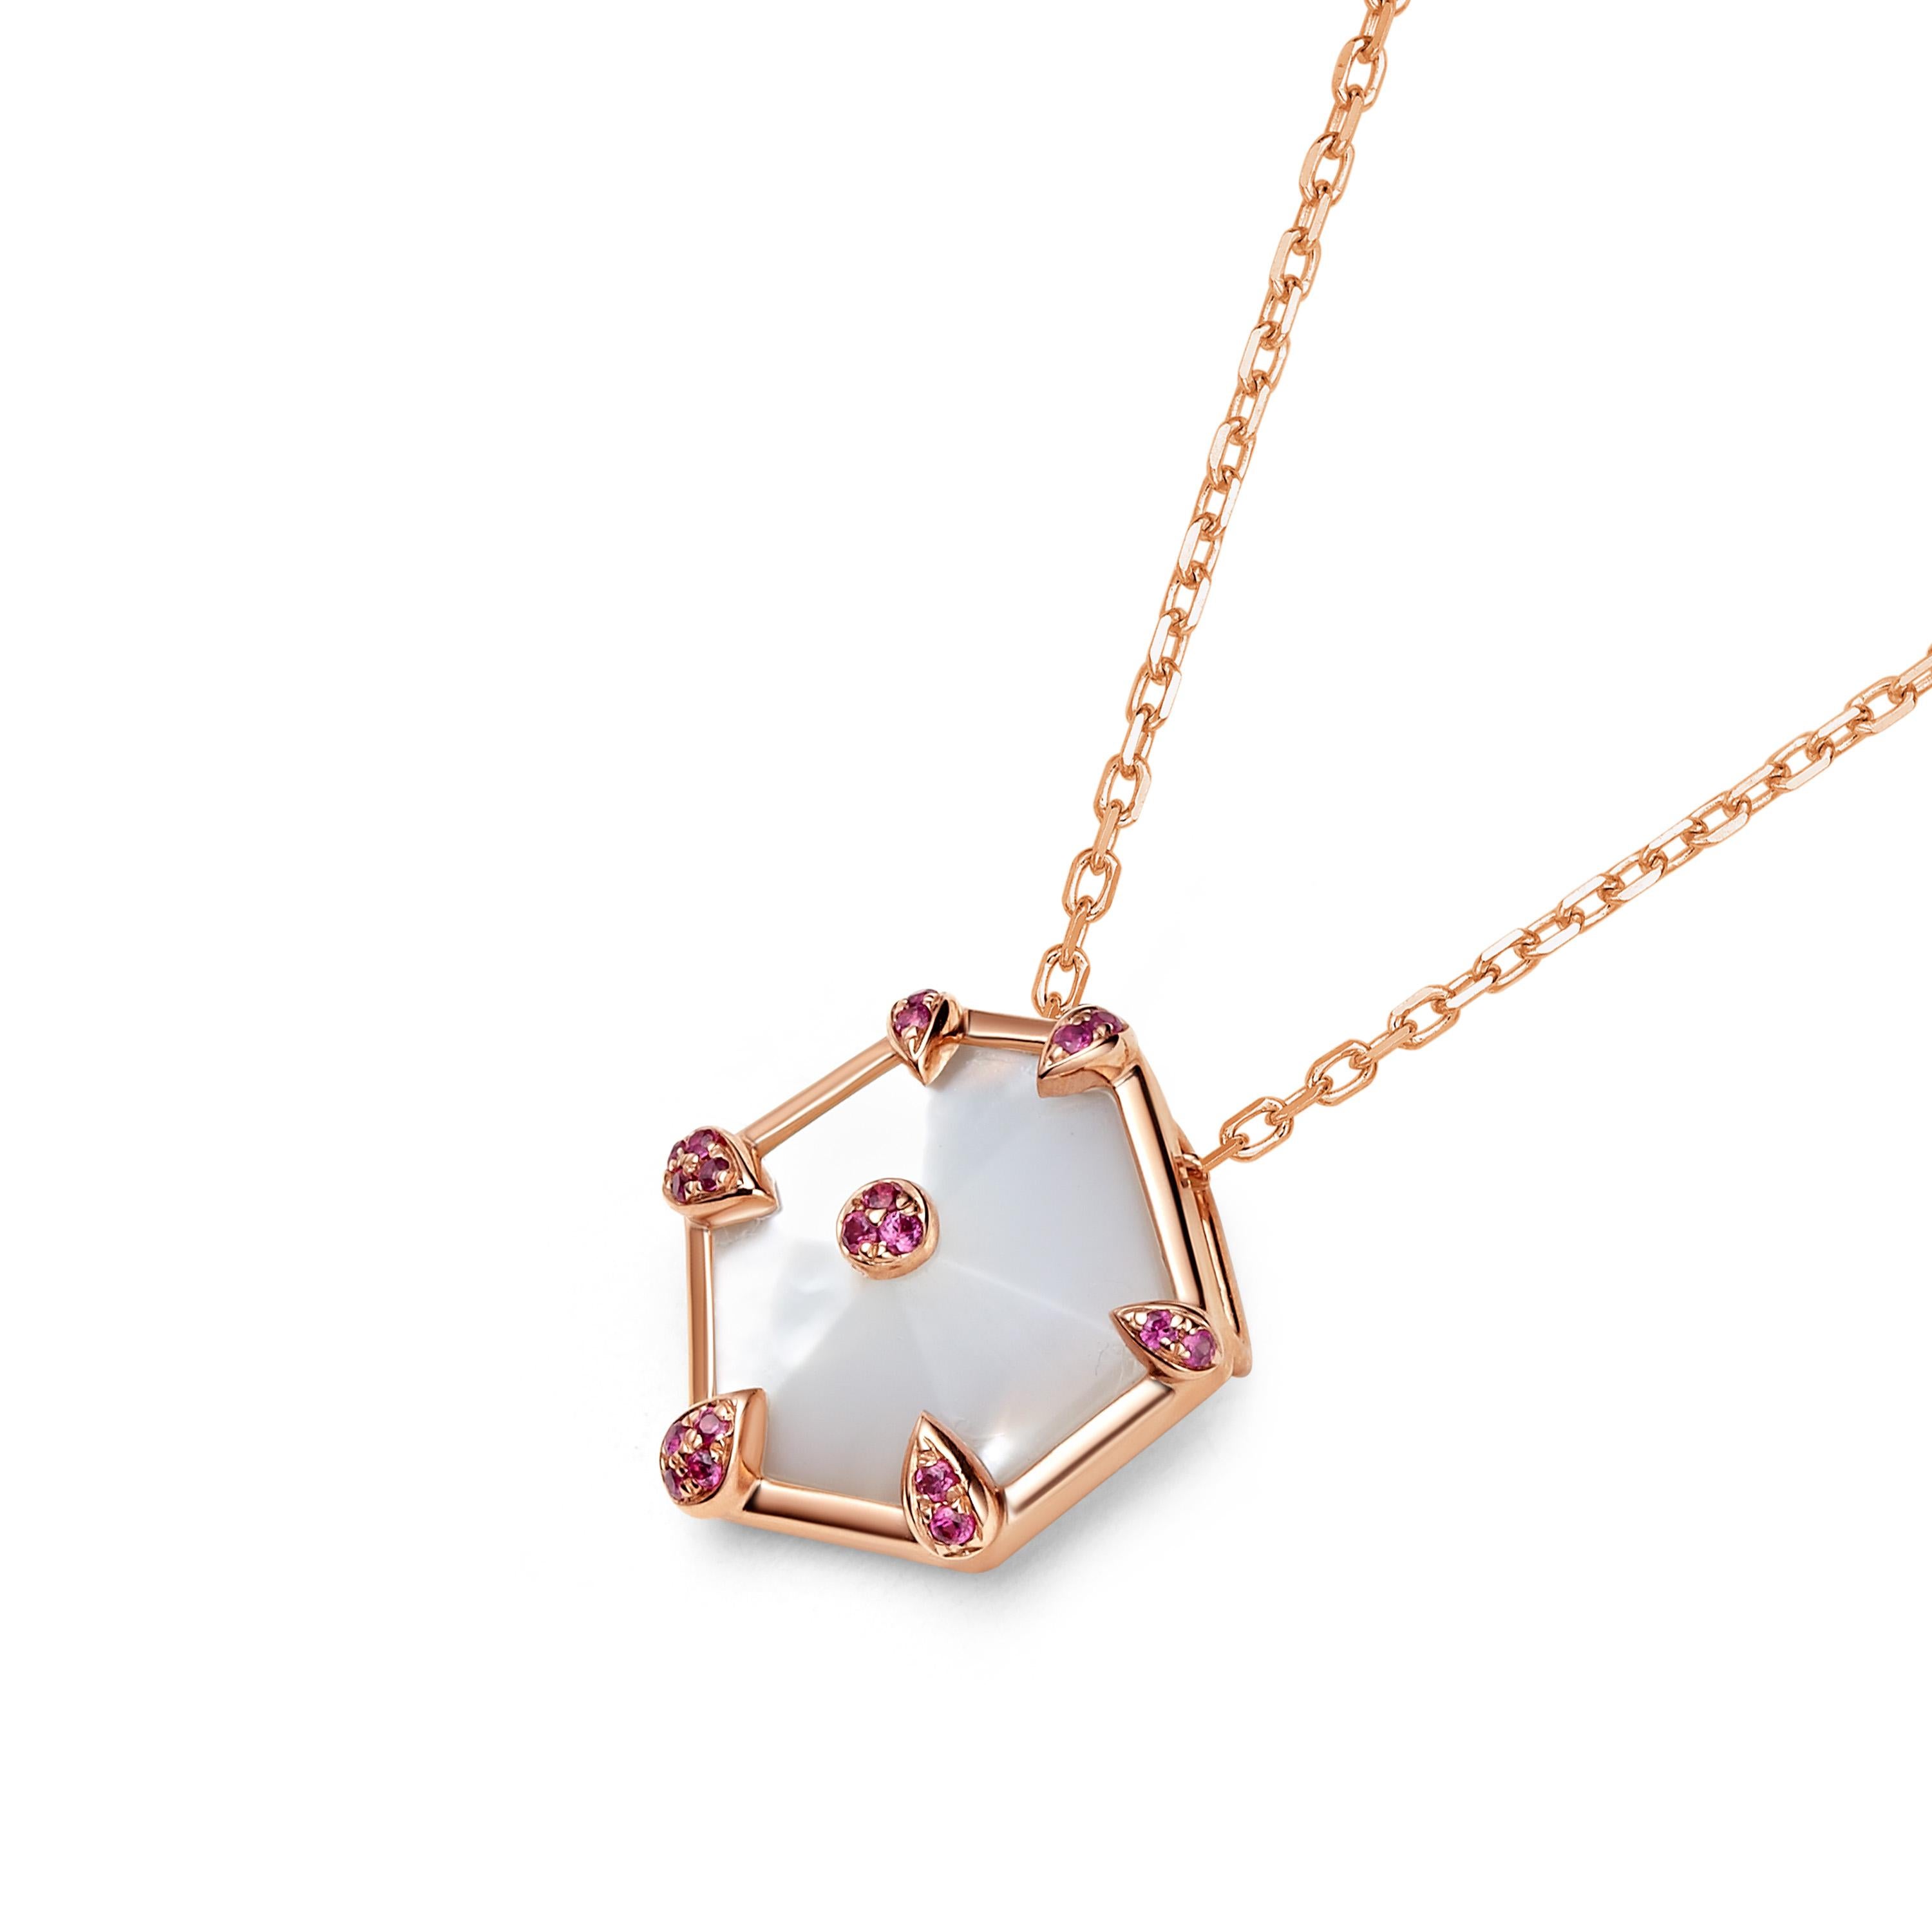 Geometric yet elegant lines are epitomised across this 18ct gold collection, which follows the strong structure of a kite.  Nova small hexagon pendant 0.048ct pink sapphires and 1.5ct mother of pearl, set in 18ct rose gold with a high polish.

-